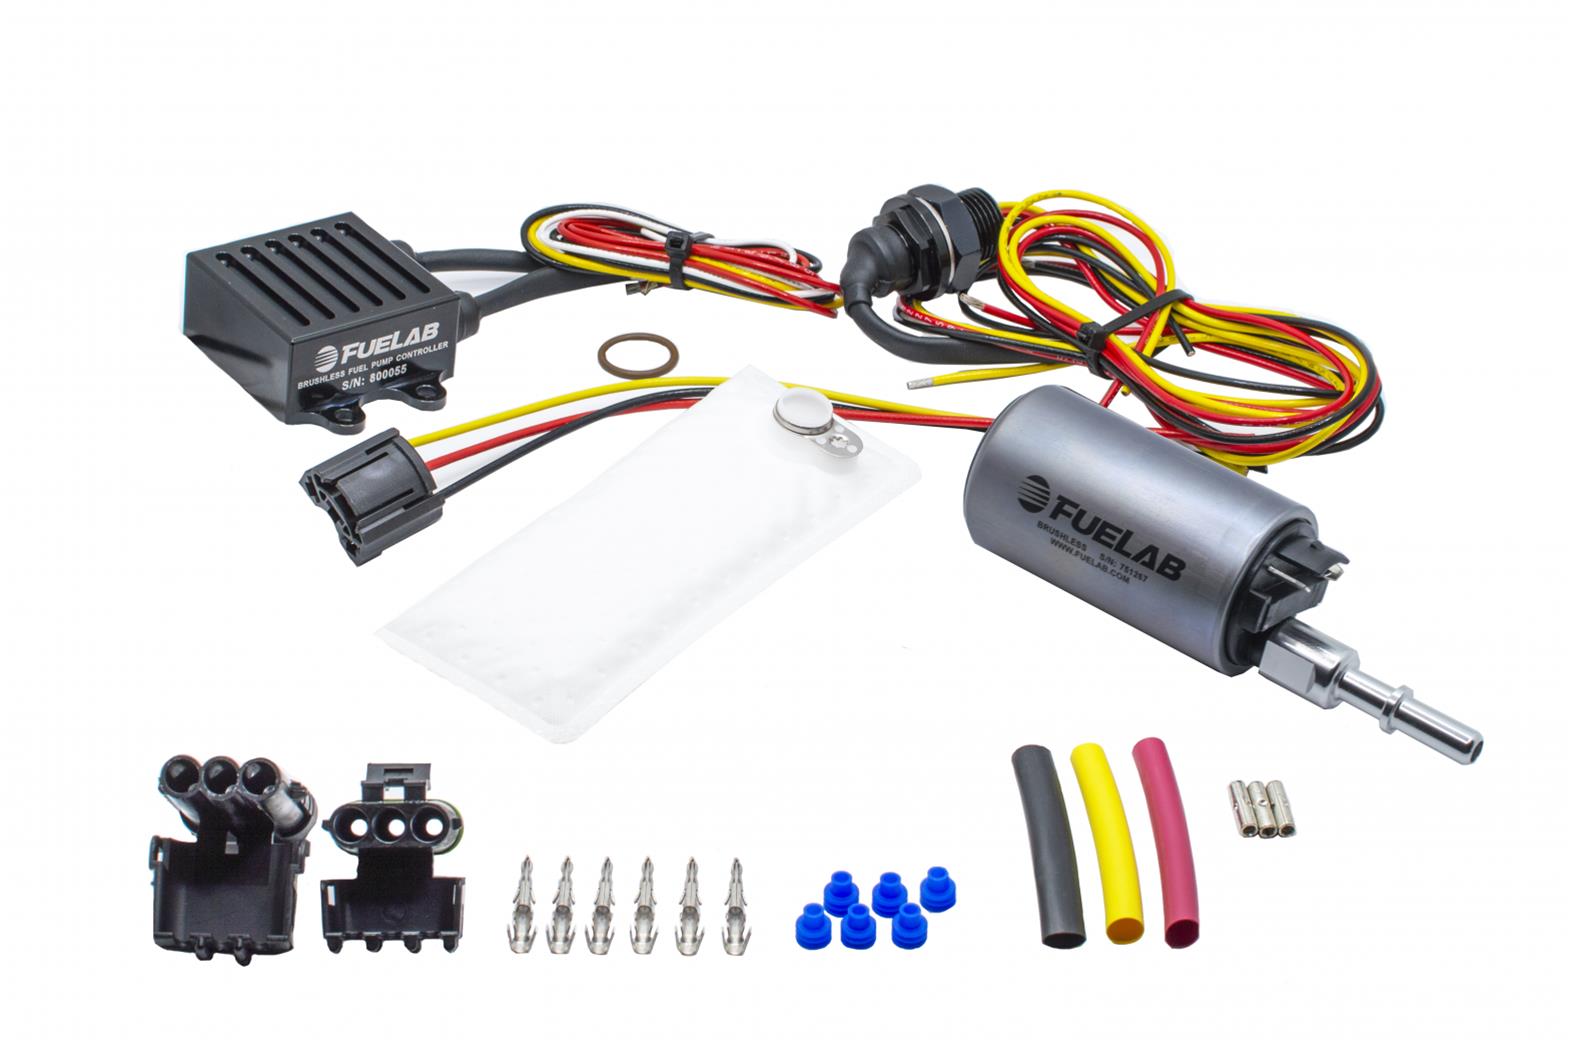 FUELAB 25302 In-Tank Brushless Fuel Pump Kit 350 LPH with 5/16 SAE Outlet Photo-0 